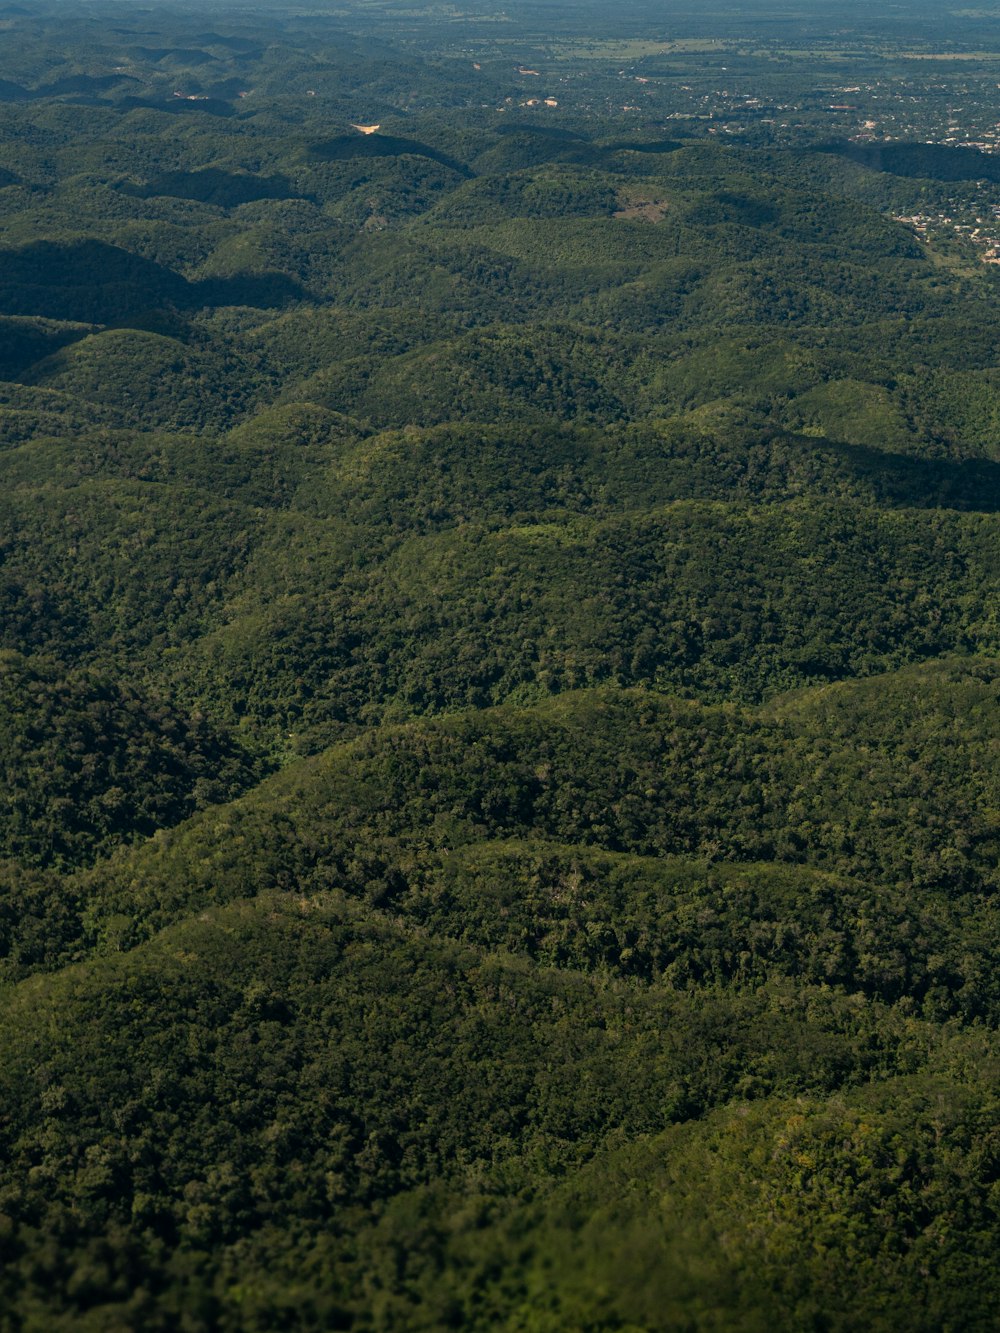 an aerial view of a lush green forest